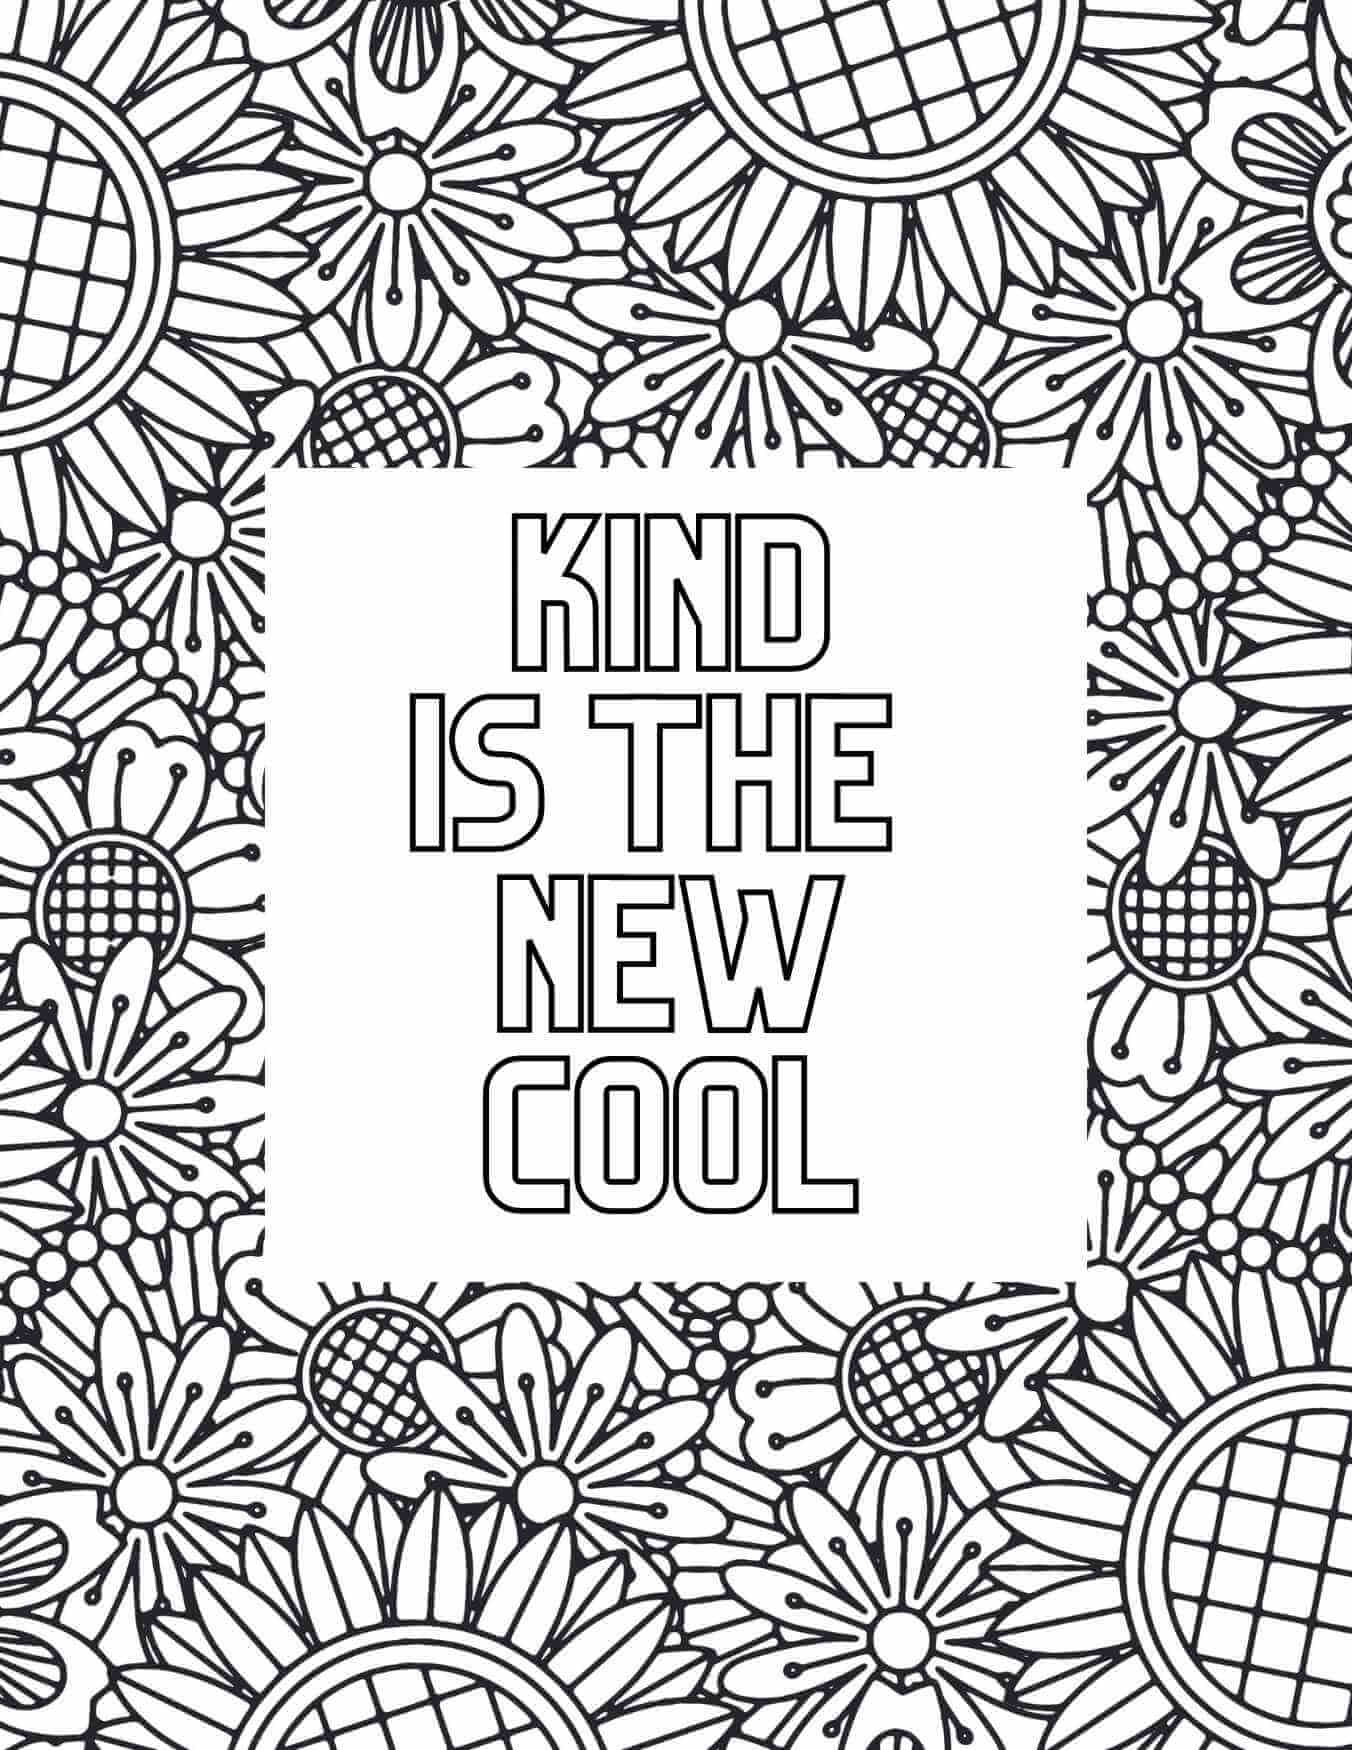 A free printable coloring page to teach kindness. Bold graphic flowers with open text overlay in the center that reads "kind is the new cool."